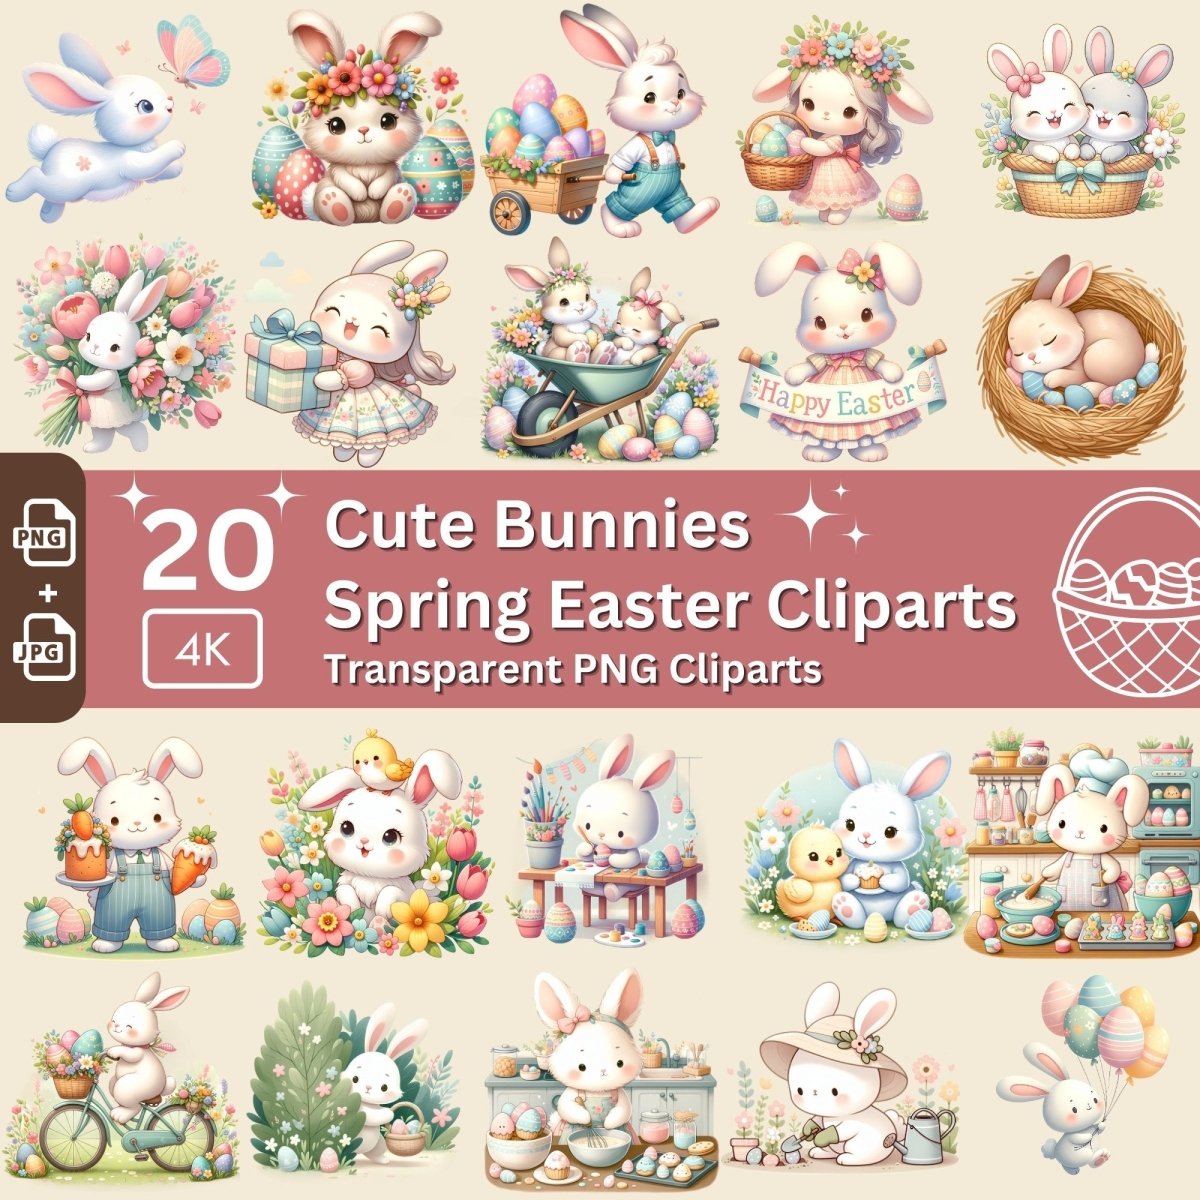 Cute Easter Bunny Cliparts 20 PNG Bundle Lovely Pastel Easter Bunnies Card Crafting Junk Journal Kit Happy Easter Spring Graphic - Everything Pixel